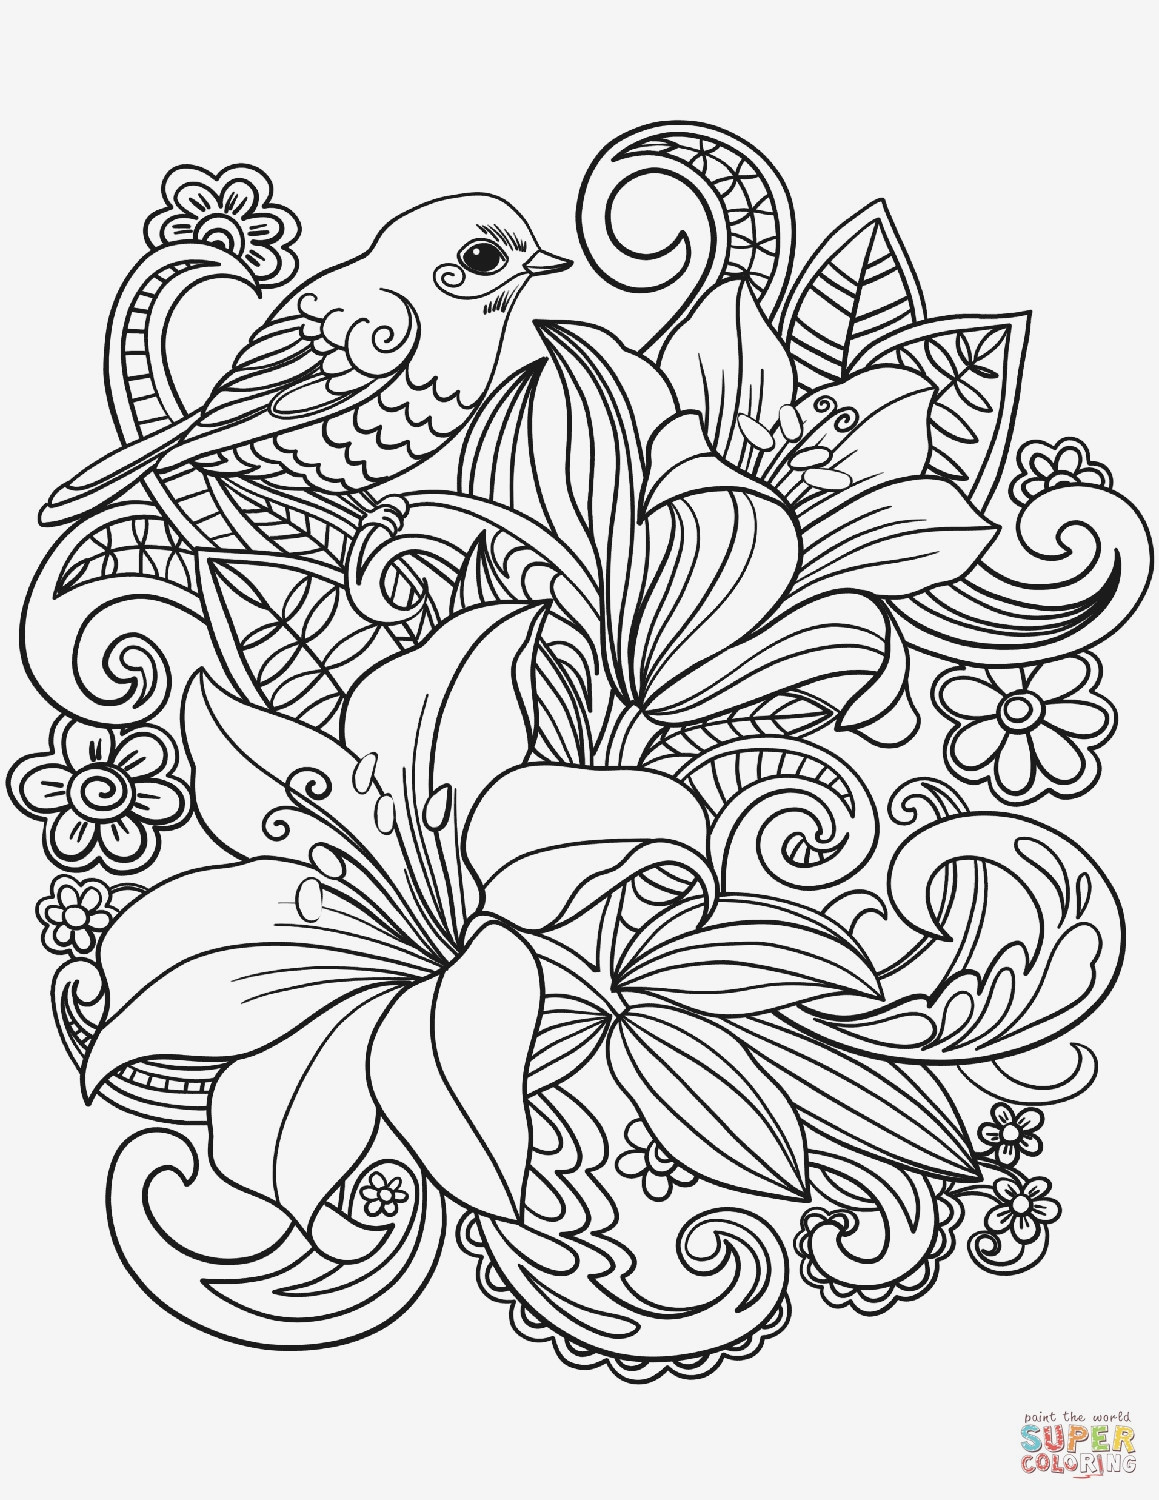 29 Fantastic Face Vase Flowers 2024 free download face vase flowers of free flower coloring pages printable cool vases flower vase coloring with free flower coloring pages printable cool vases flower vase coloring page pages flowers in a to